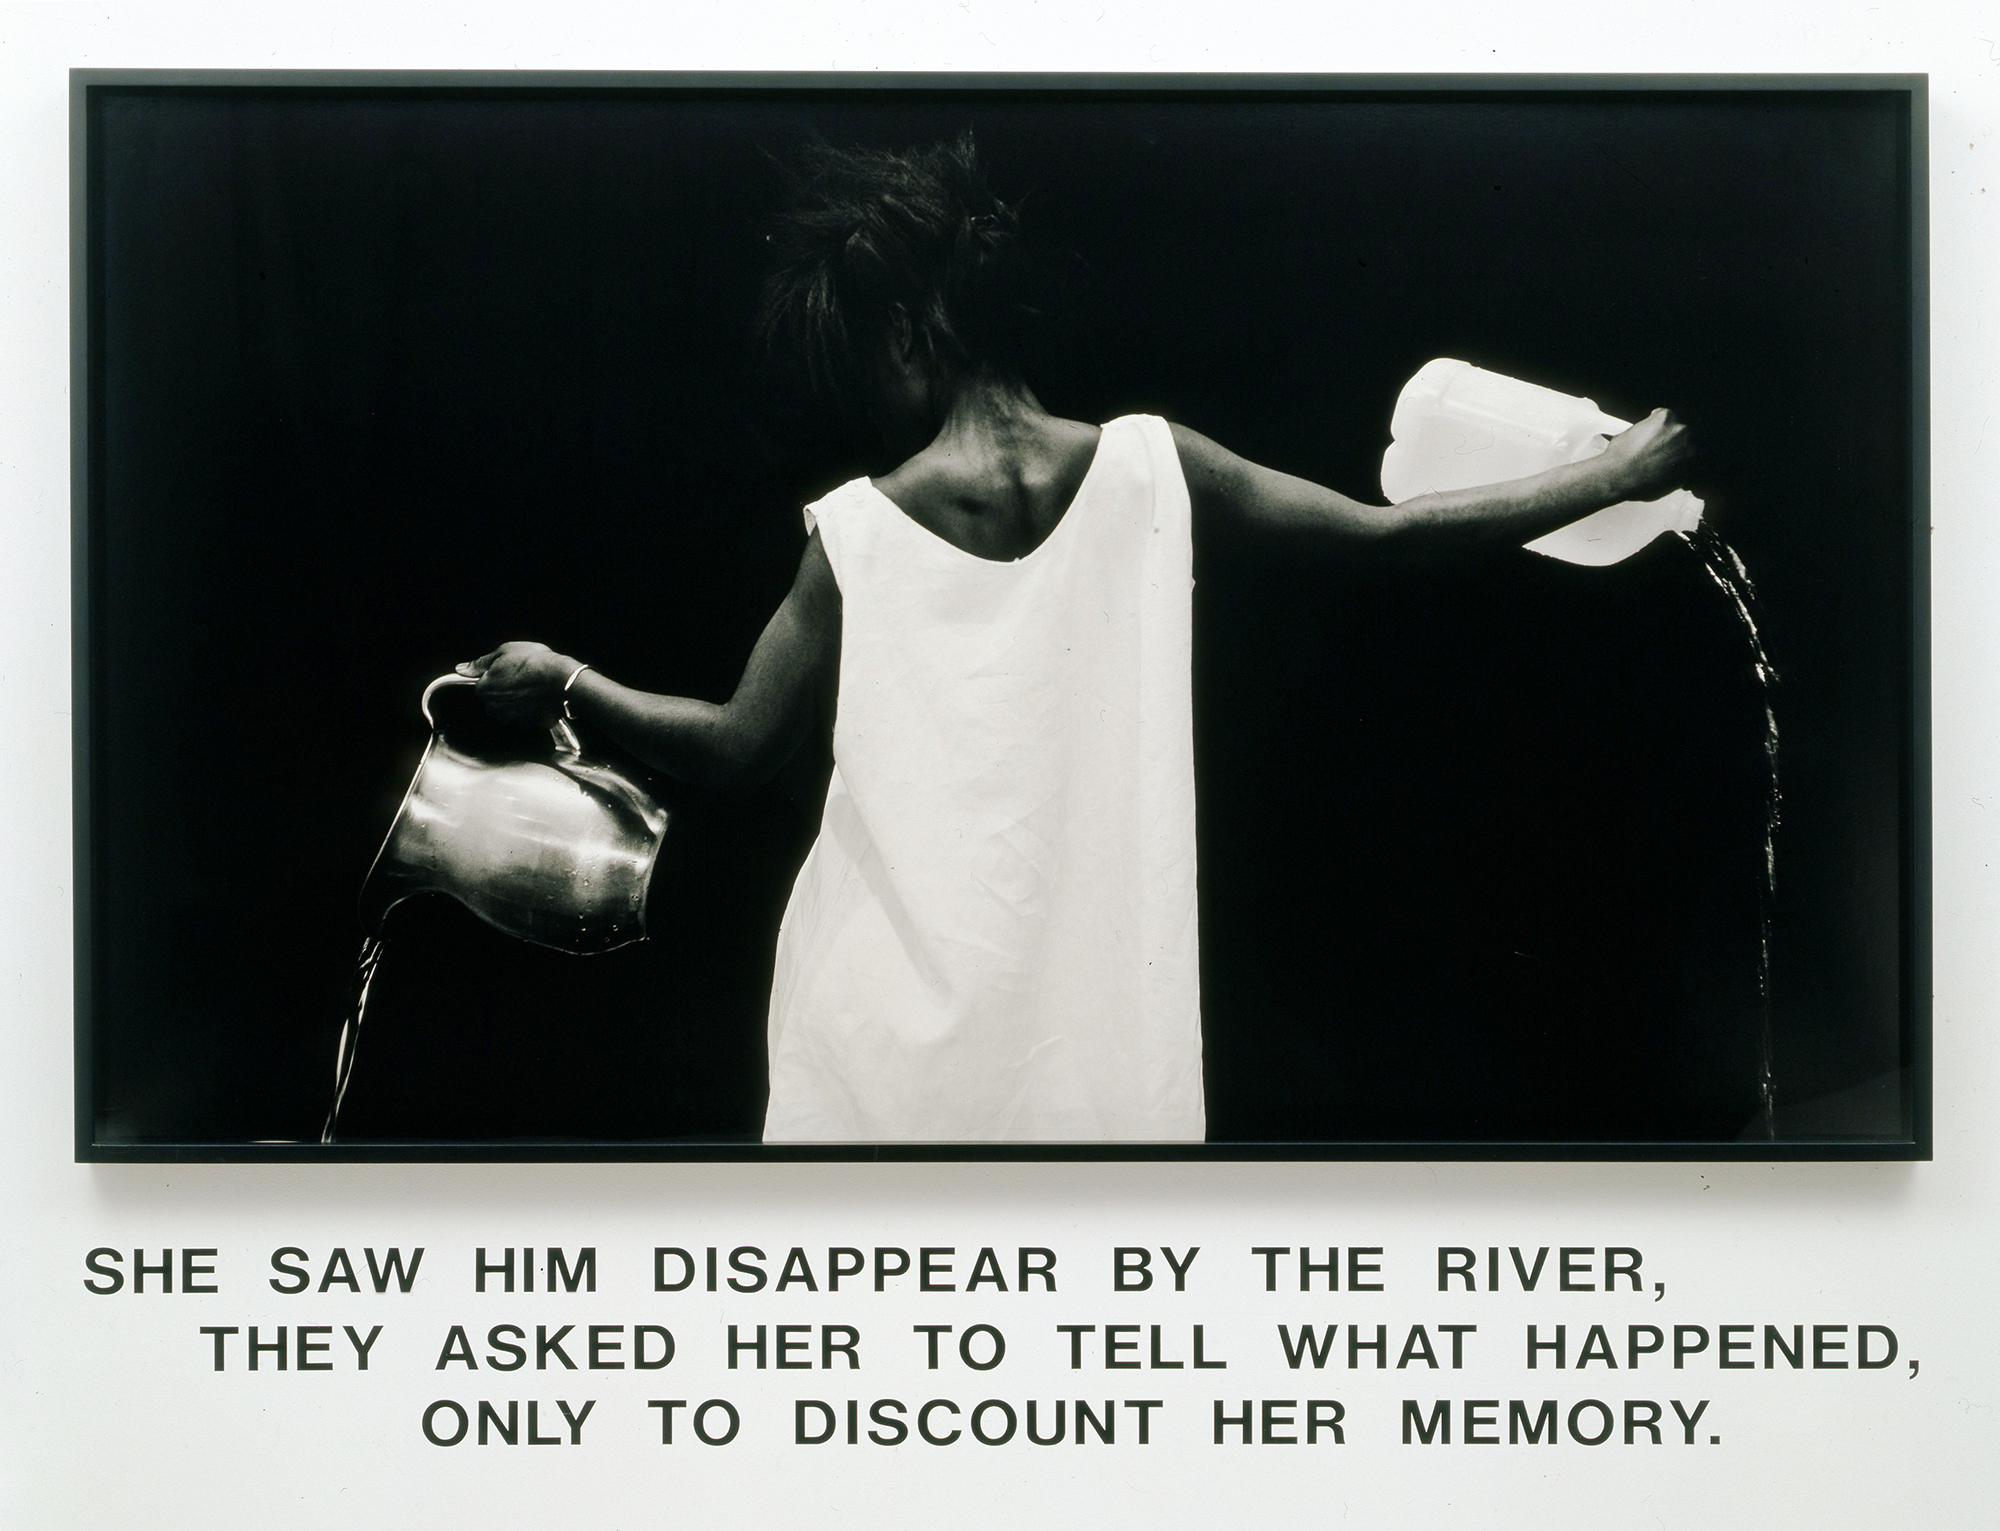 Lorna Simpson (American, born 1960). Waterbearer, 1986. Gelatin silver print with vinyl lettering, 59 × 80 × 2¼ in. (149.9 × 203.2 × 5.7 cm). Courtesy of Lorna Simpson. © 1986 Lorna SimpsonAny reproduction of the Work must not have any image, text, etc. superimposed over it, nor may the Work be reproduced on colored stock, nor shall it be reproduced in part, nor combined with work by others. All artworks must be reproduced in FULL COLOR.